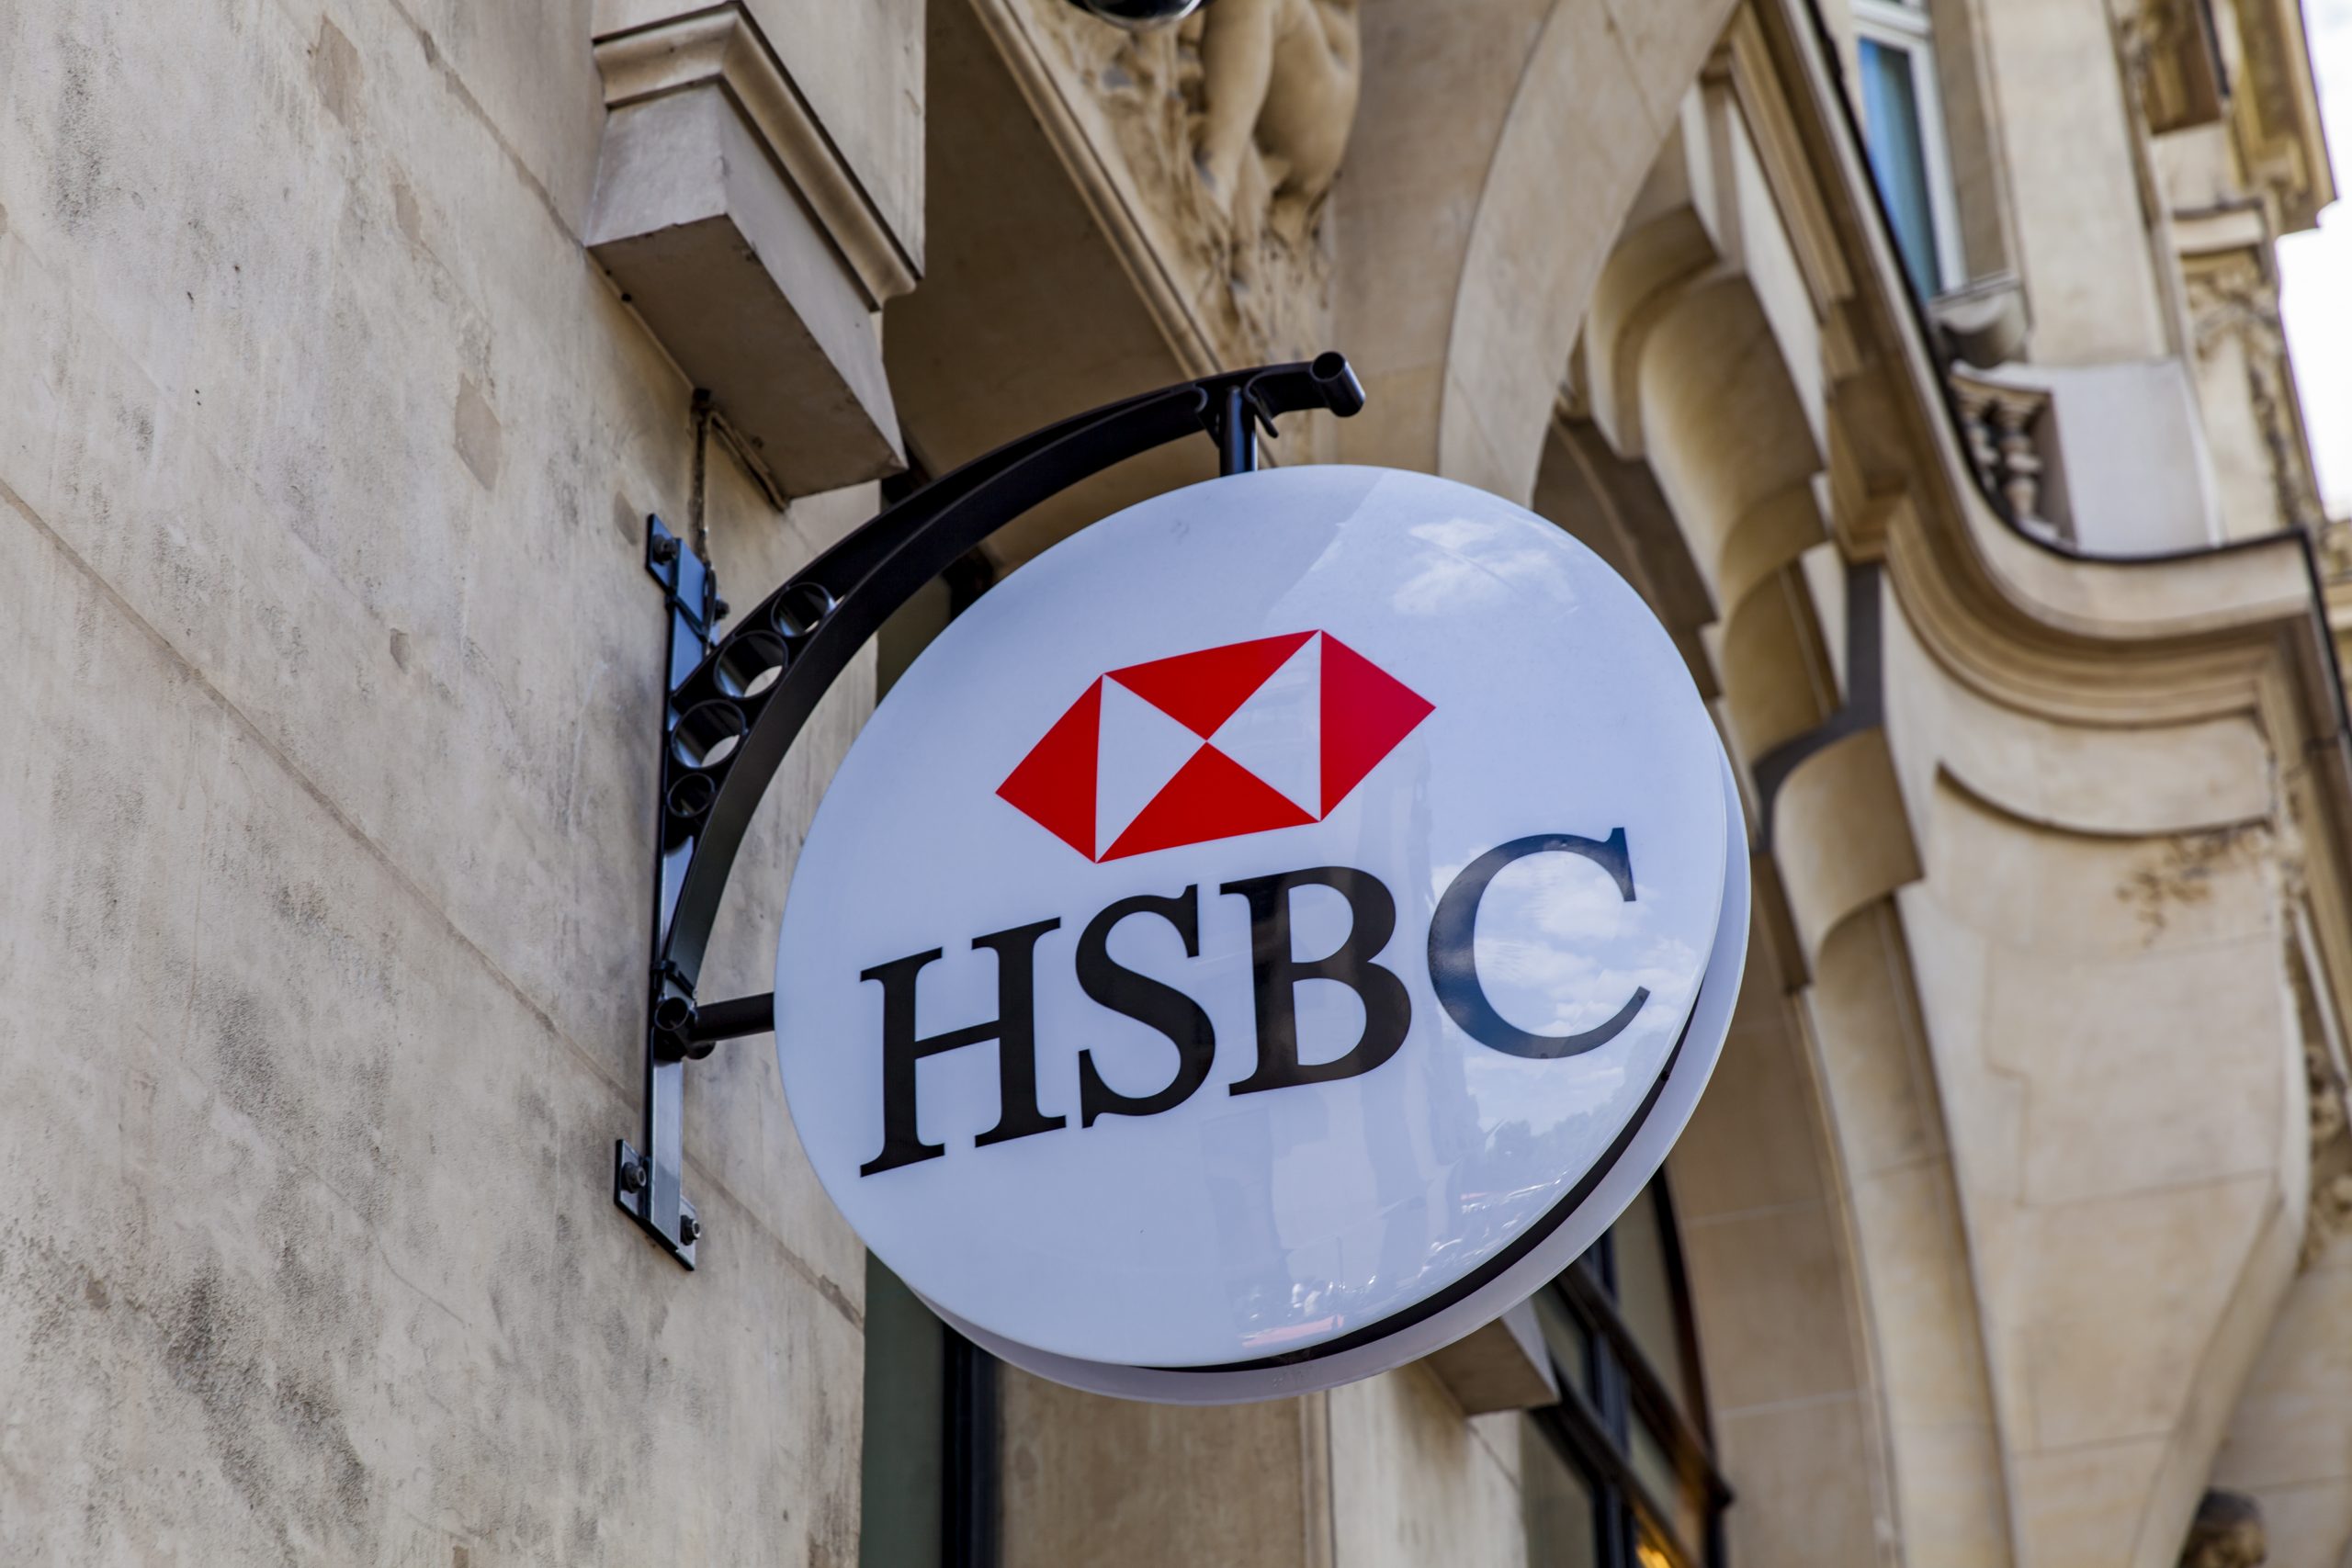 Leading Mortgage expert comments: The property market signal given by HSBC’s controversial decision